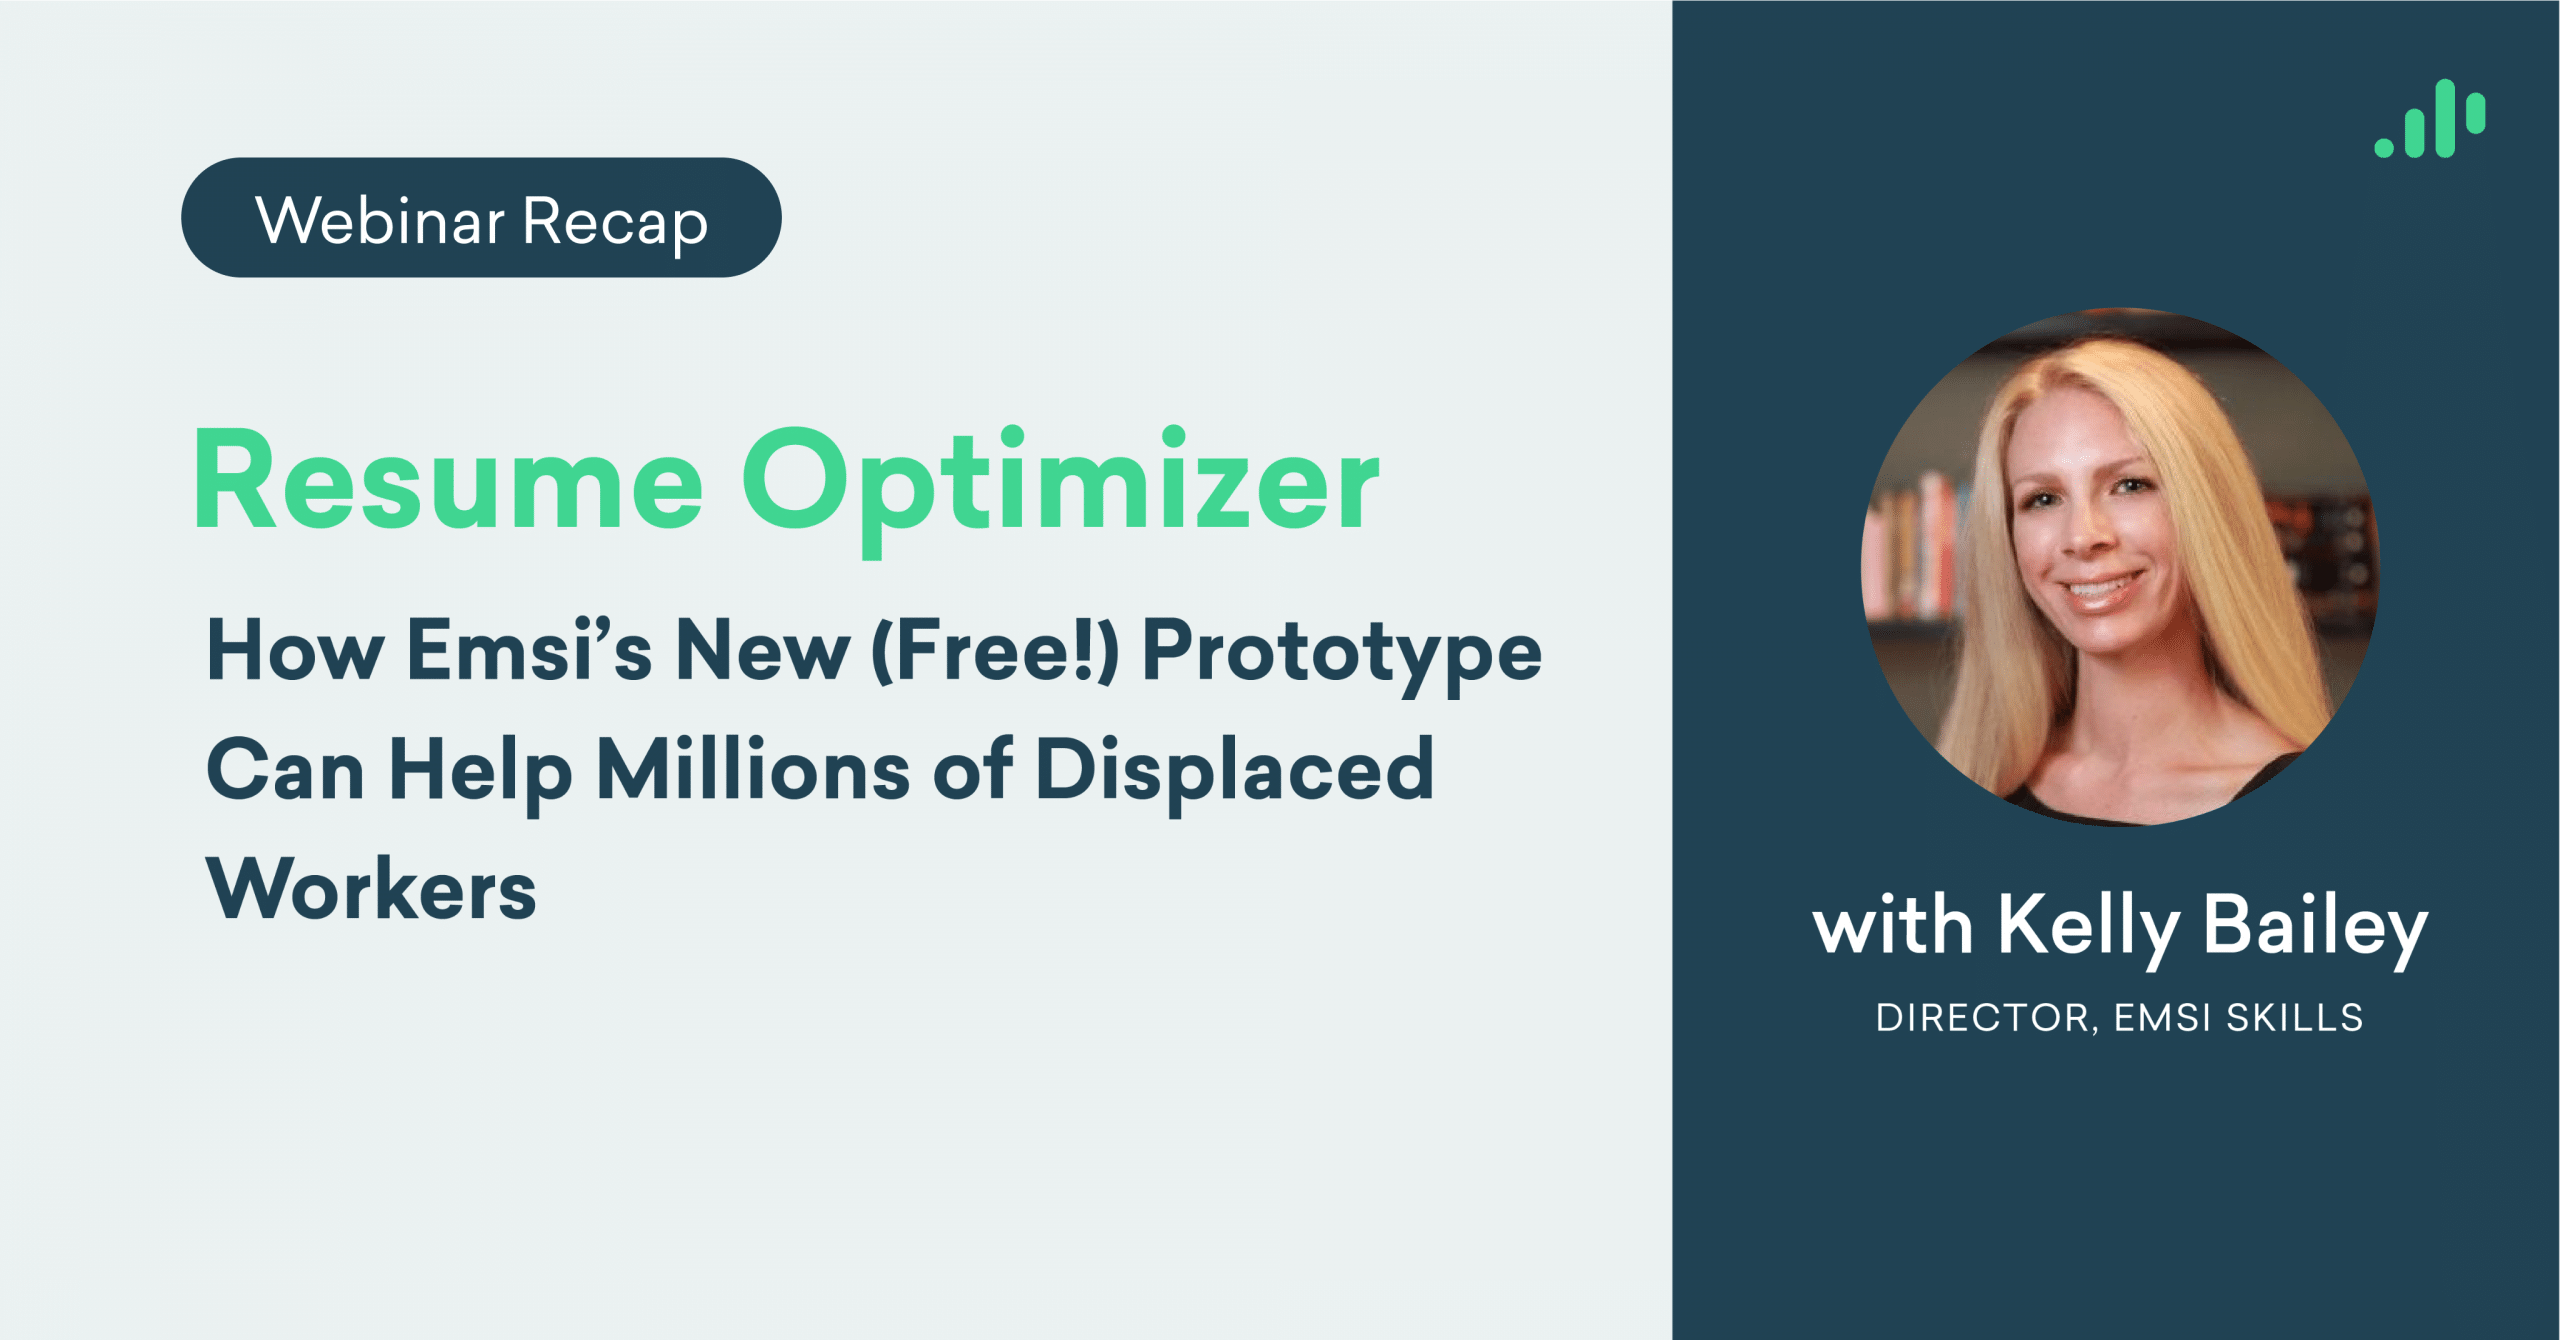 Webinar Recap: Resume Optimizer &#8211; How Emsi’s New (Free!) Prototype Can Help Millions of Displaced Workers